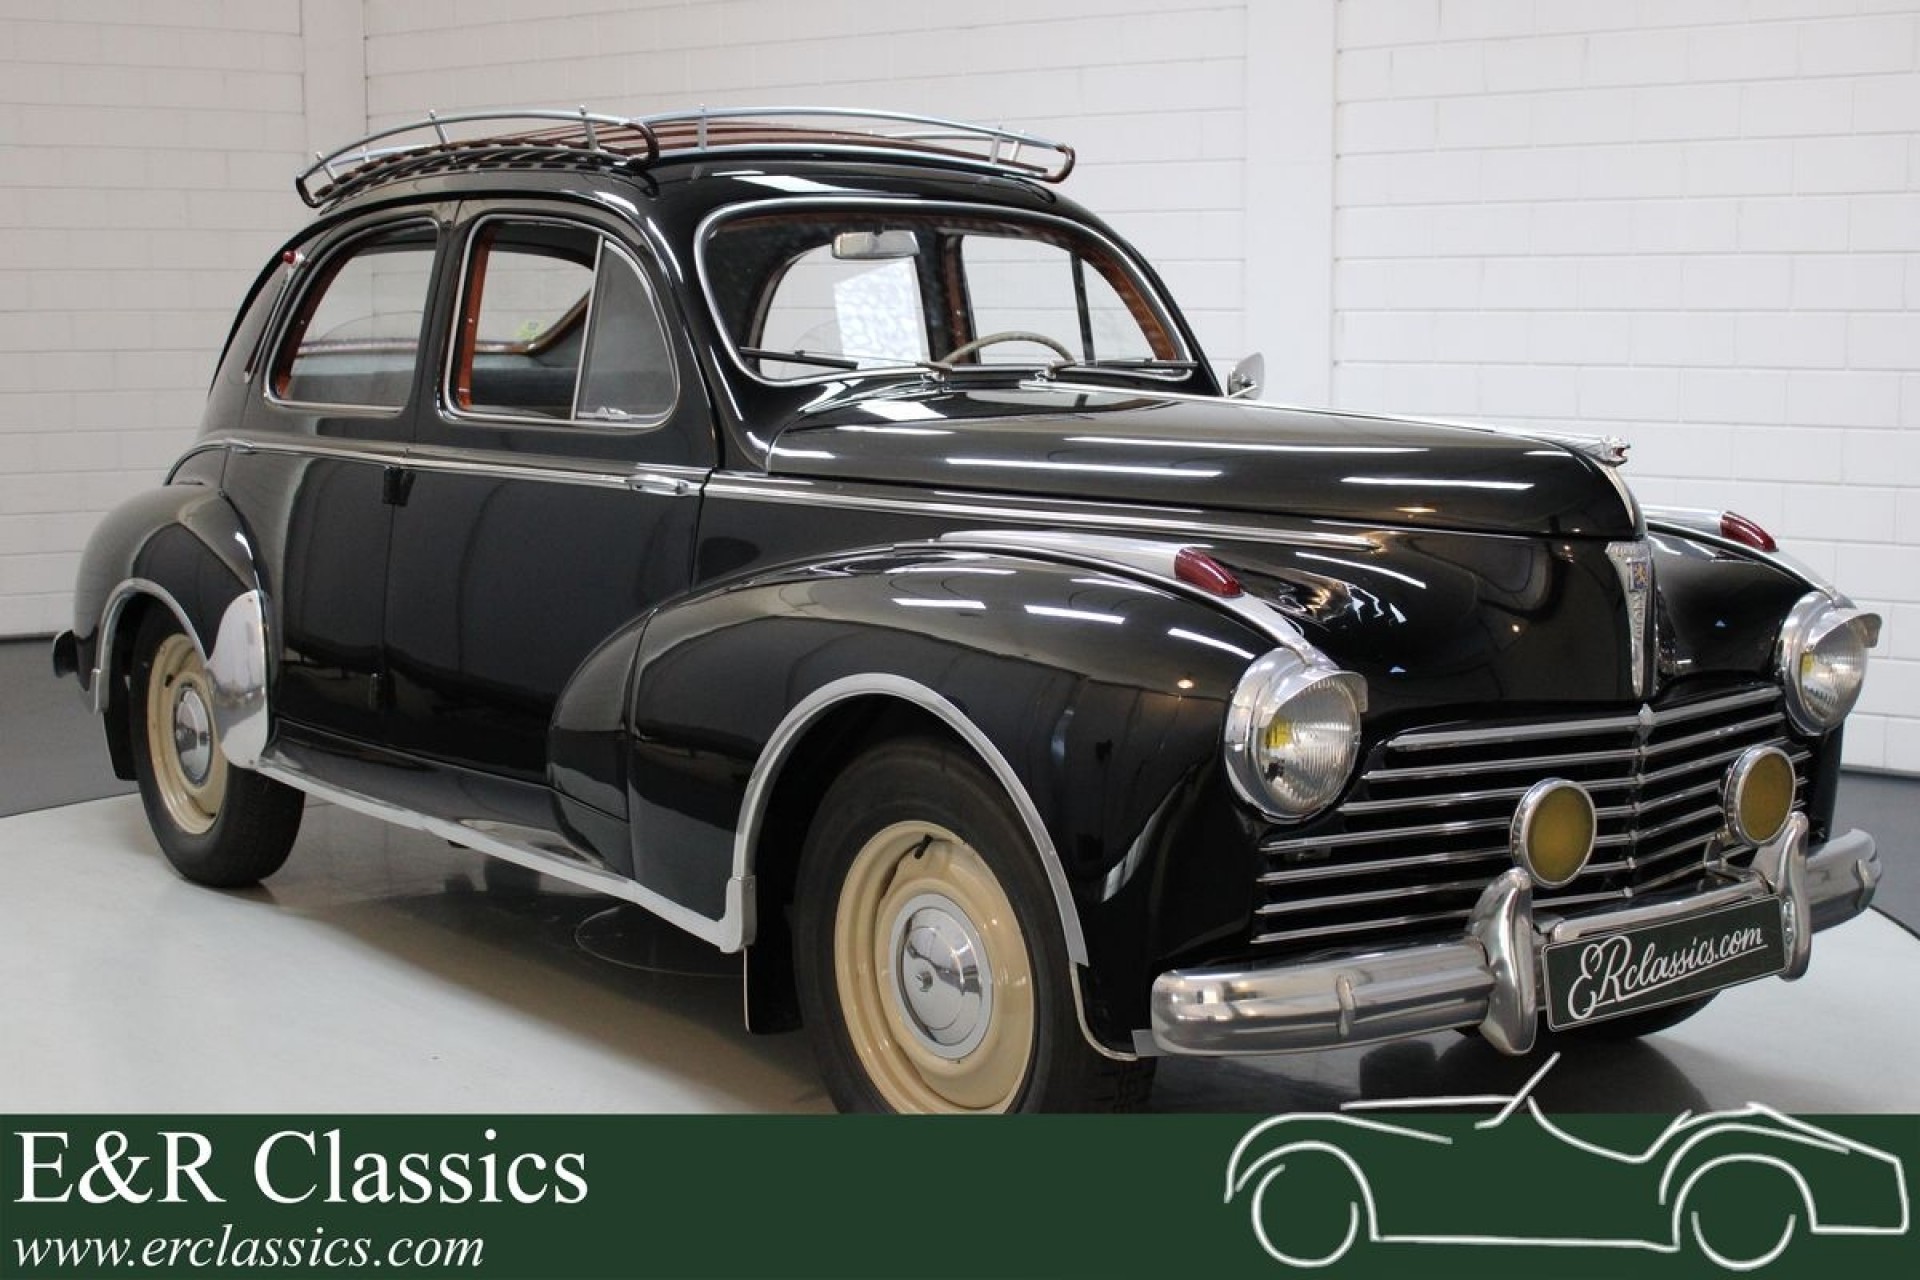 peugeot-203a-very-good-condition-1953-for-sale-at-erclassics